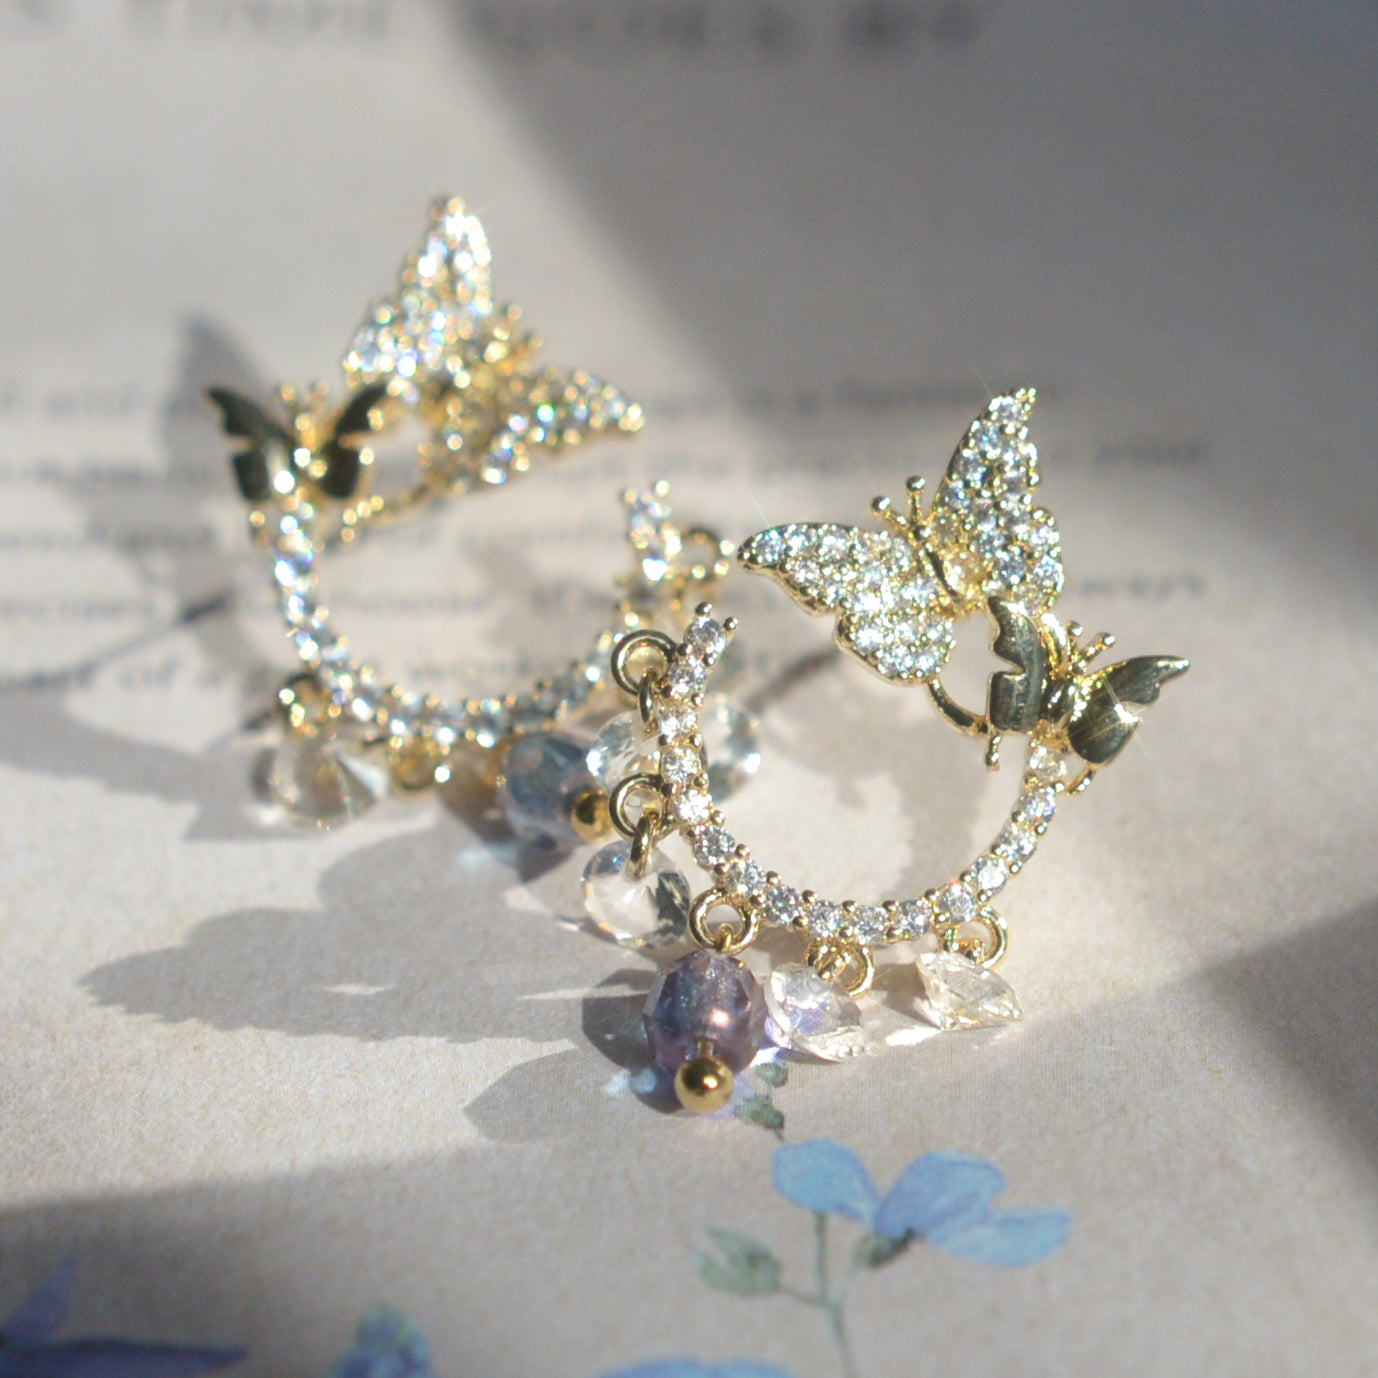 Original Butterfly Wreath Earrings Are Sweet And Exquisite